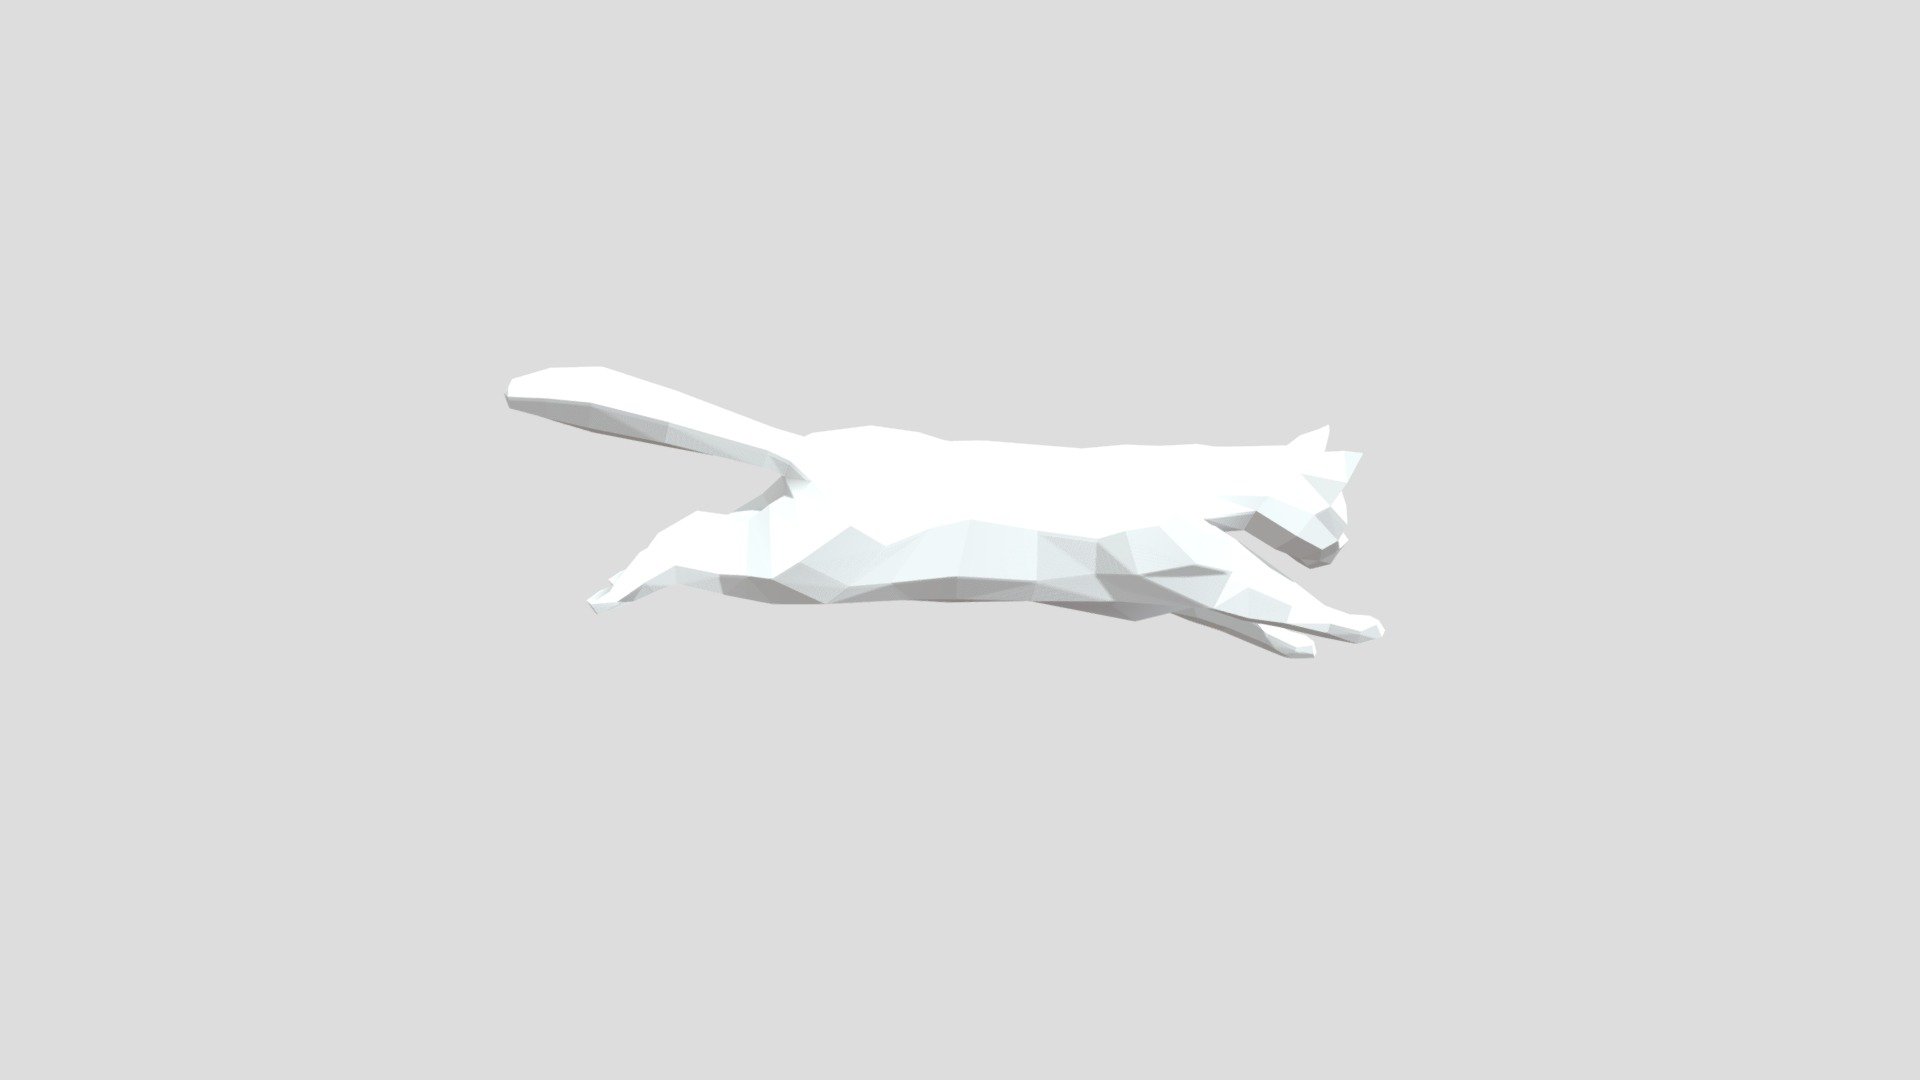 3d model low-poly cat animation run - cat Rigged - Download Free 3D model by Vr-cvantorium 3d model